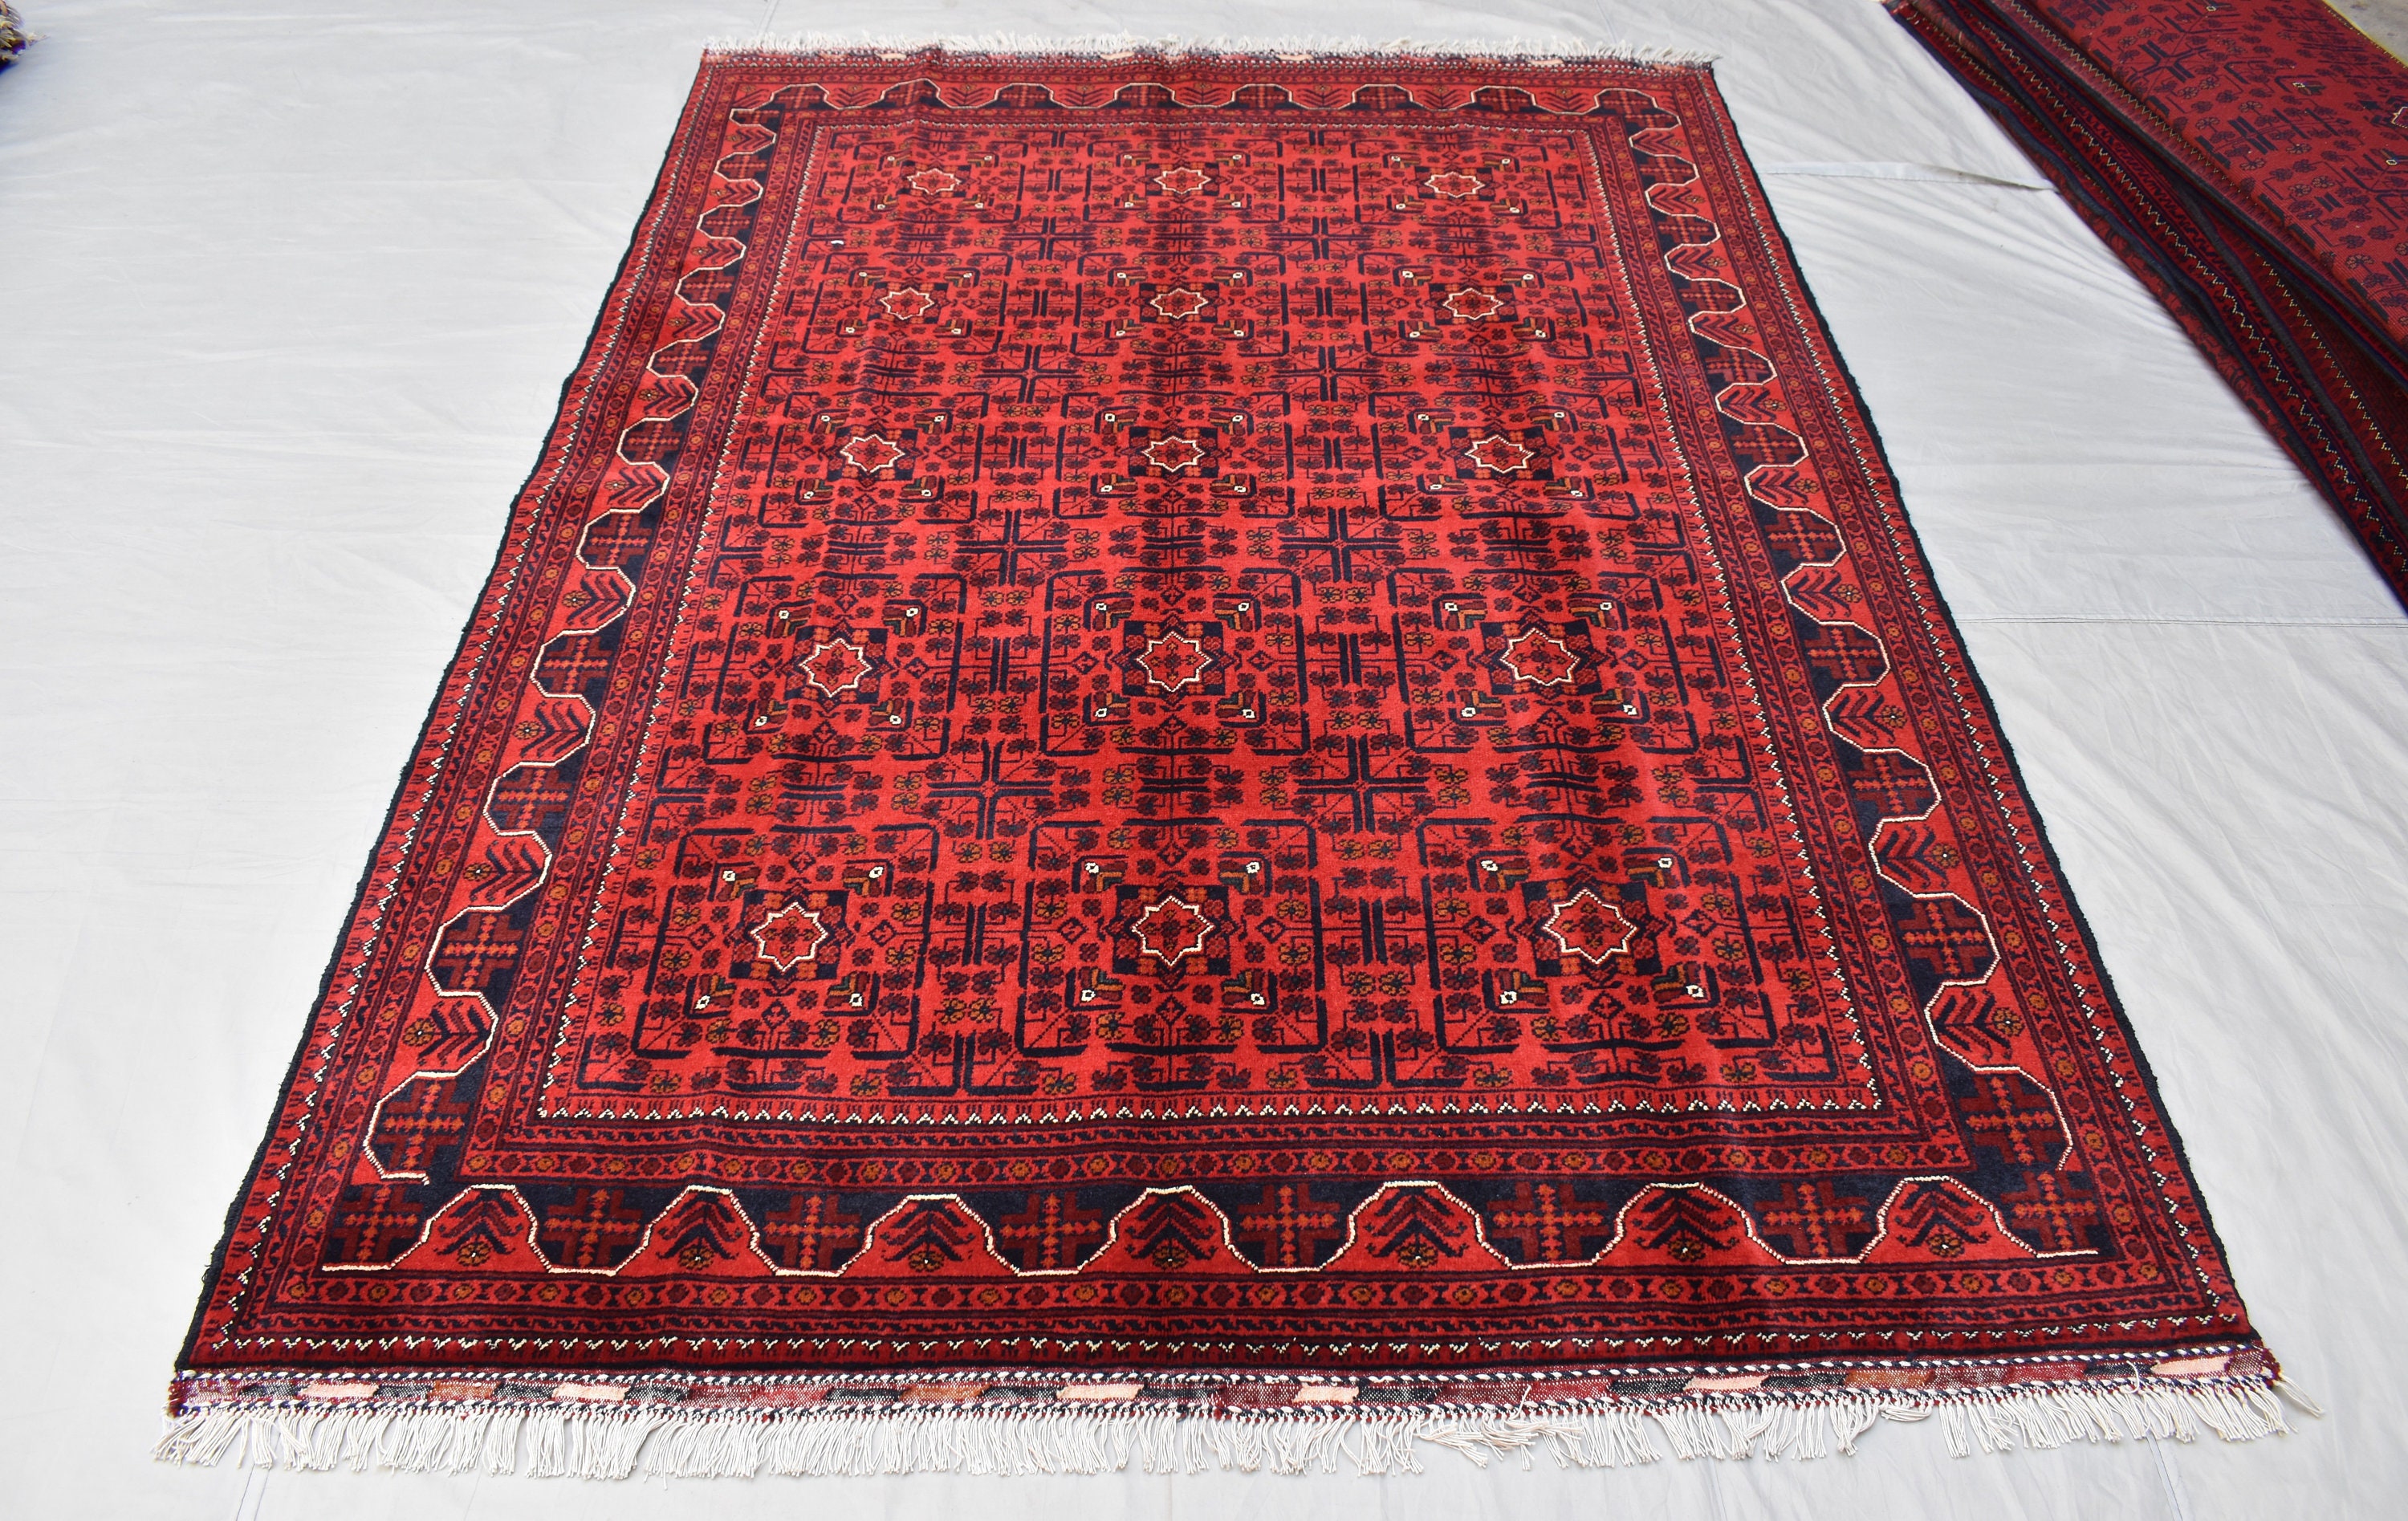 7.9 x 5.7 Ft Red Medium Area Rug, 6x8 Ft Turkmen Hand-knotted Wool Rug, Oriental Rug, Living Room Home Décor Red Carpet, Afghan Bukhara Rug,thumbnail